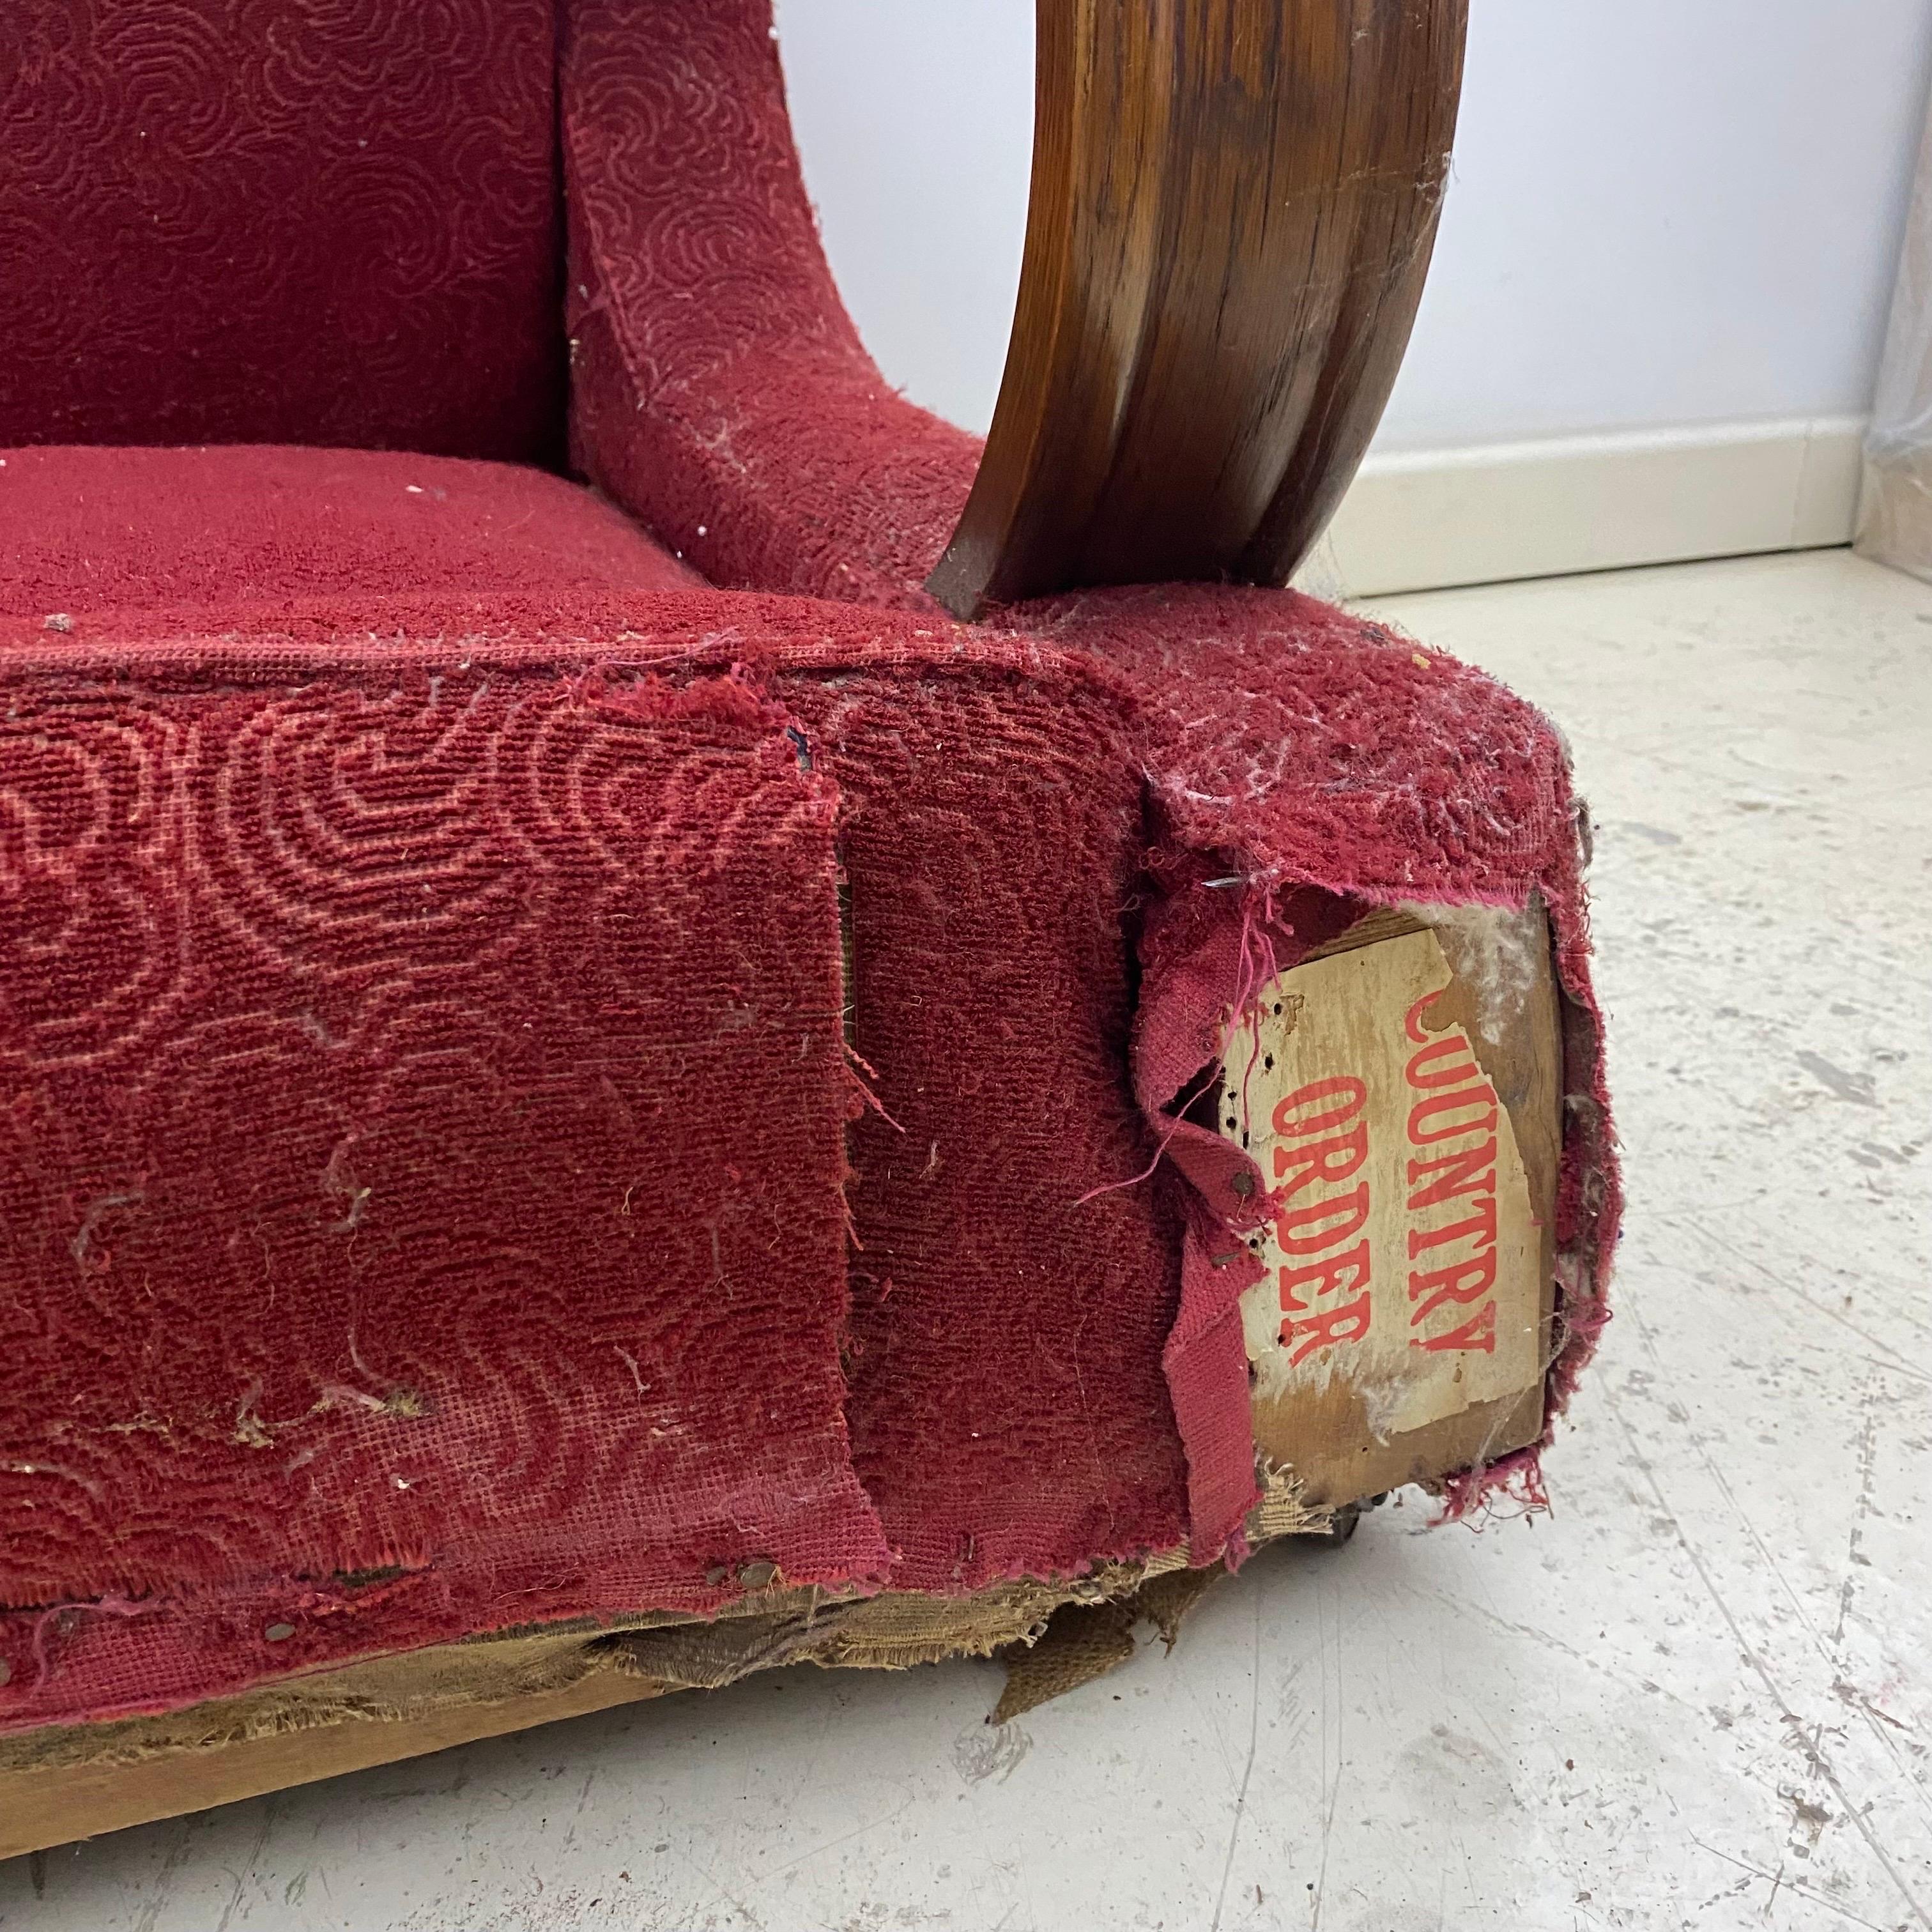 Art Deco 1940s Red Two Seater Distressed Sofa Restoration Project As Seen Poirot en vente 7